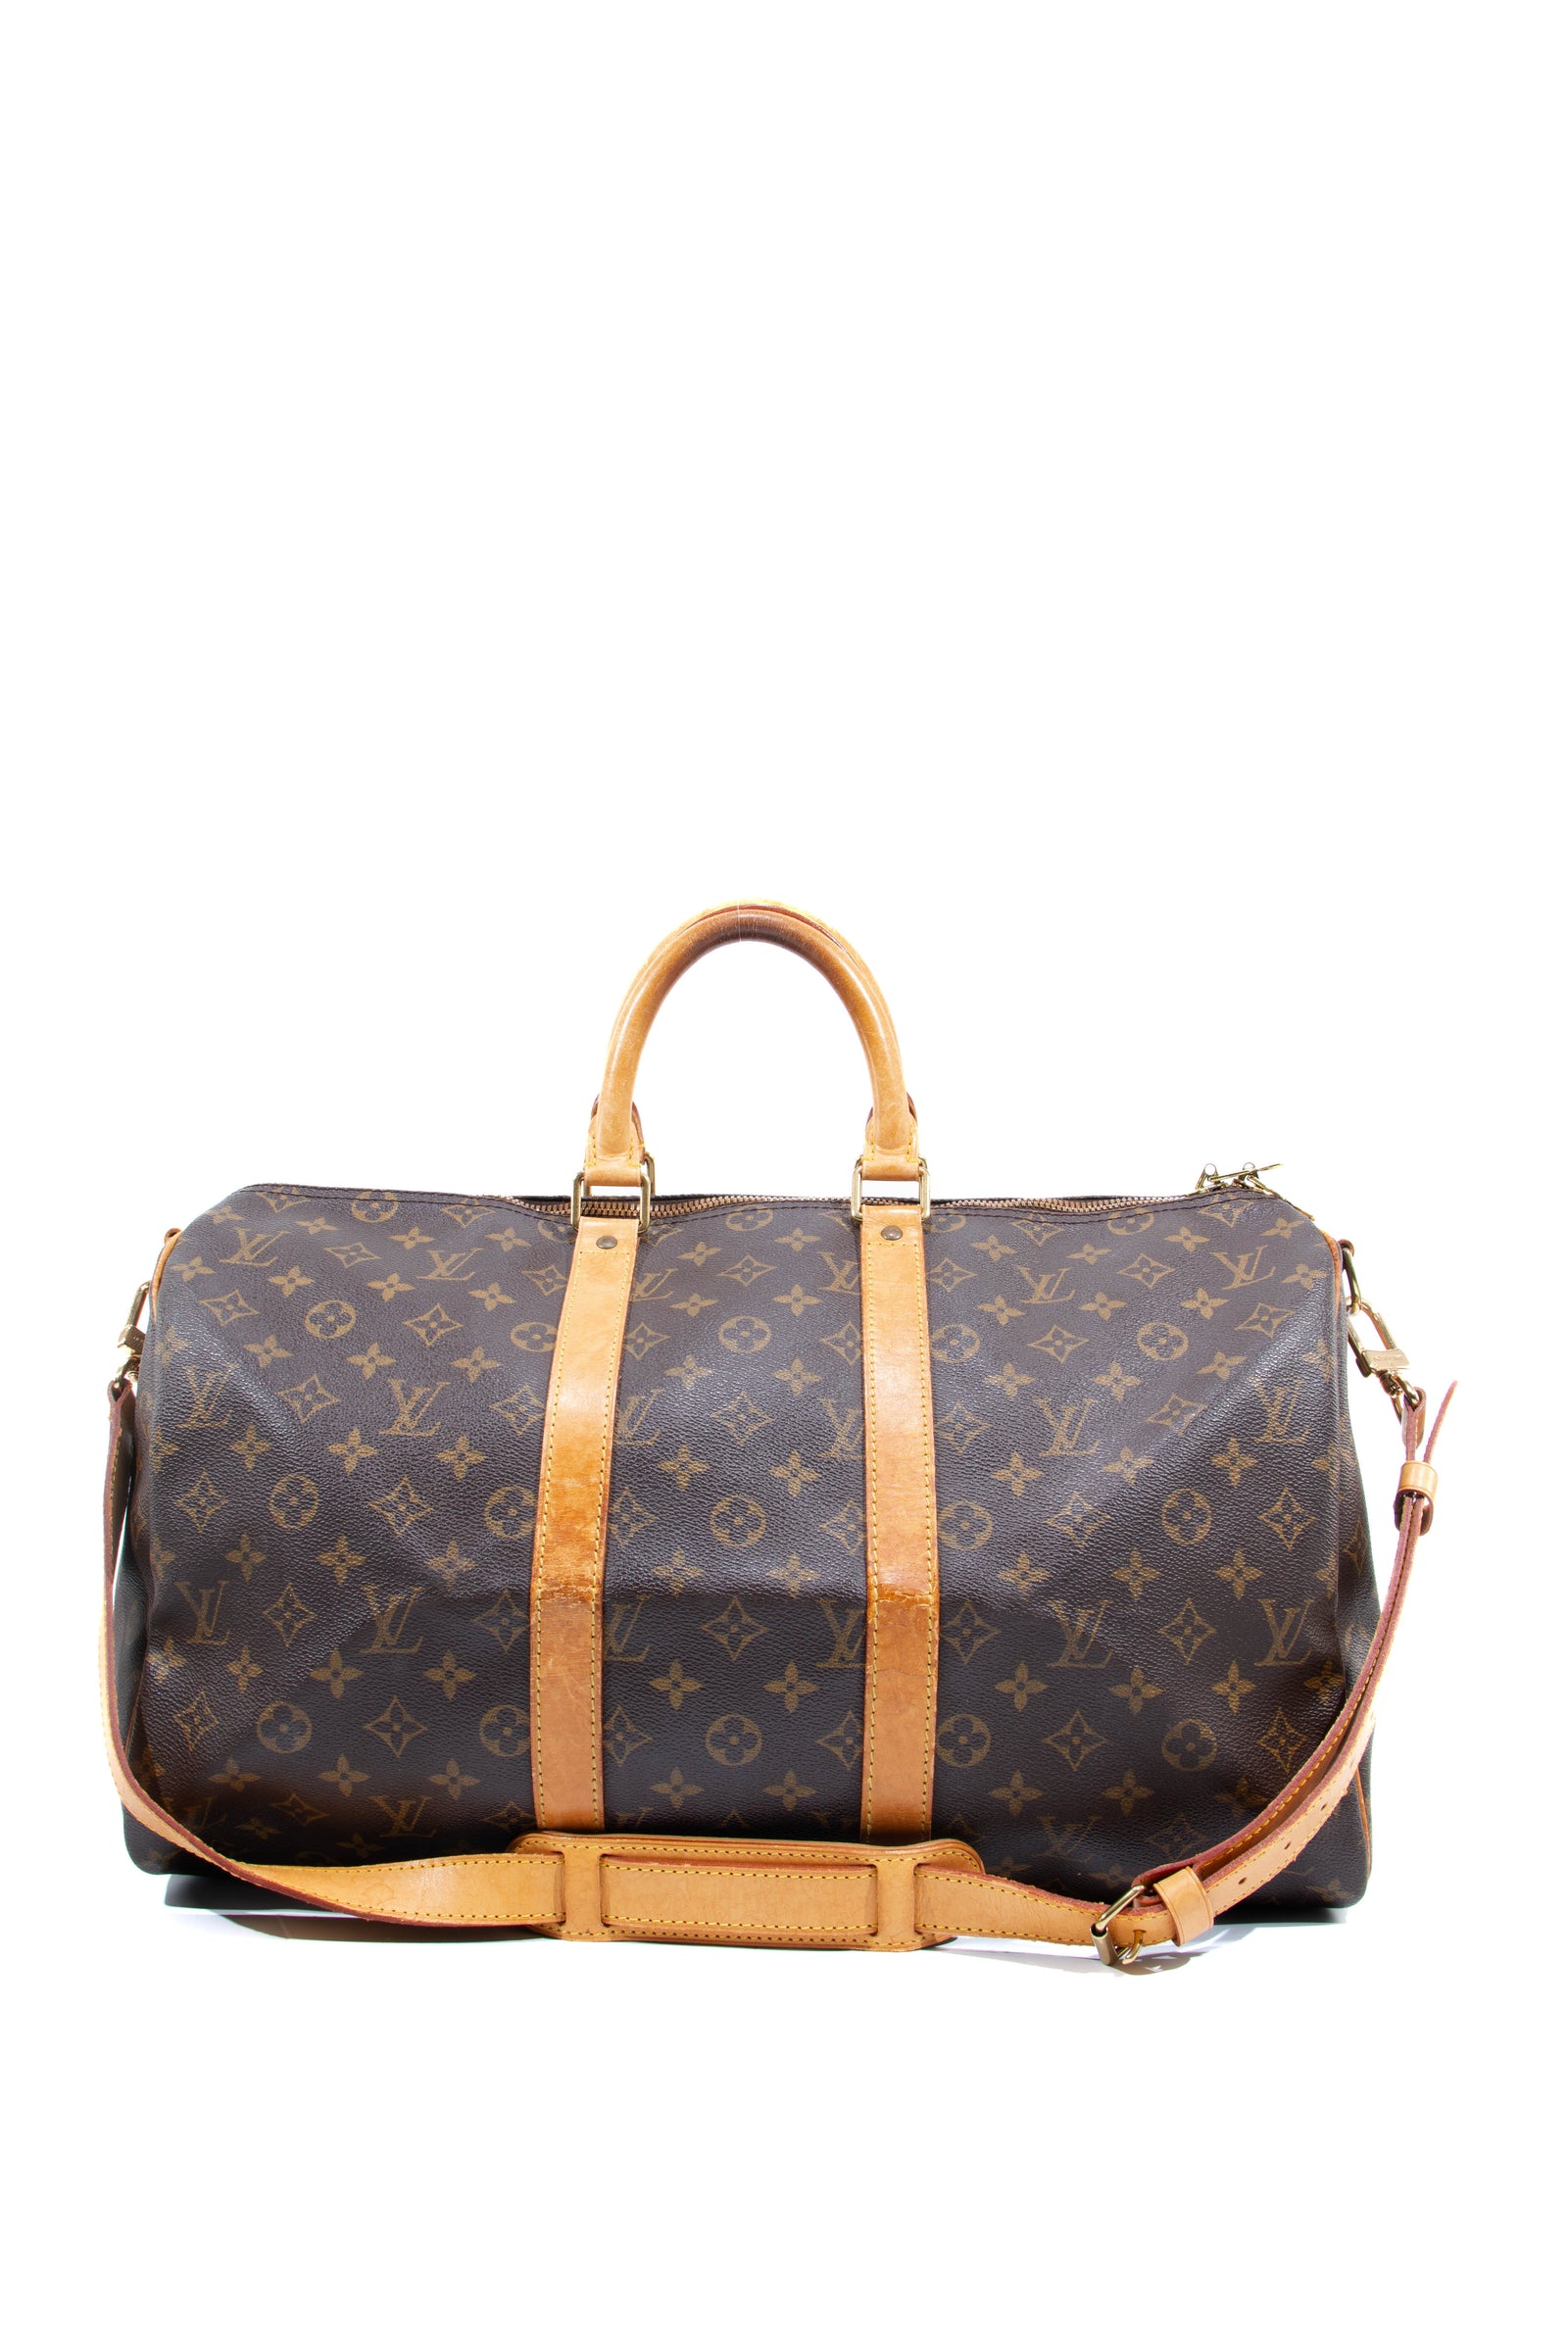 Louis Vuitton Unisex Soft Type Luggage & Travel Bags